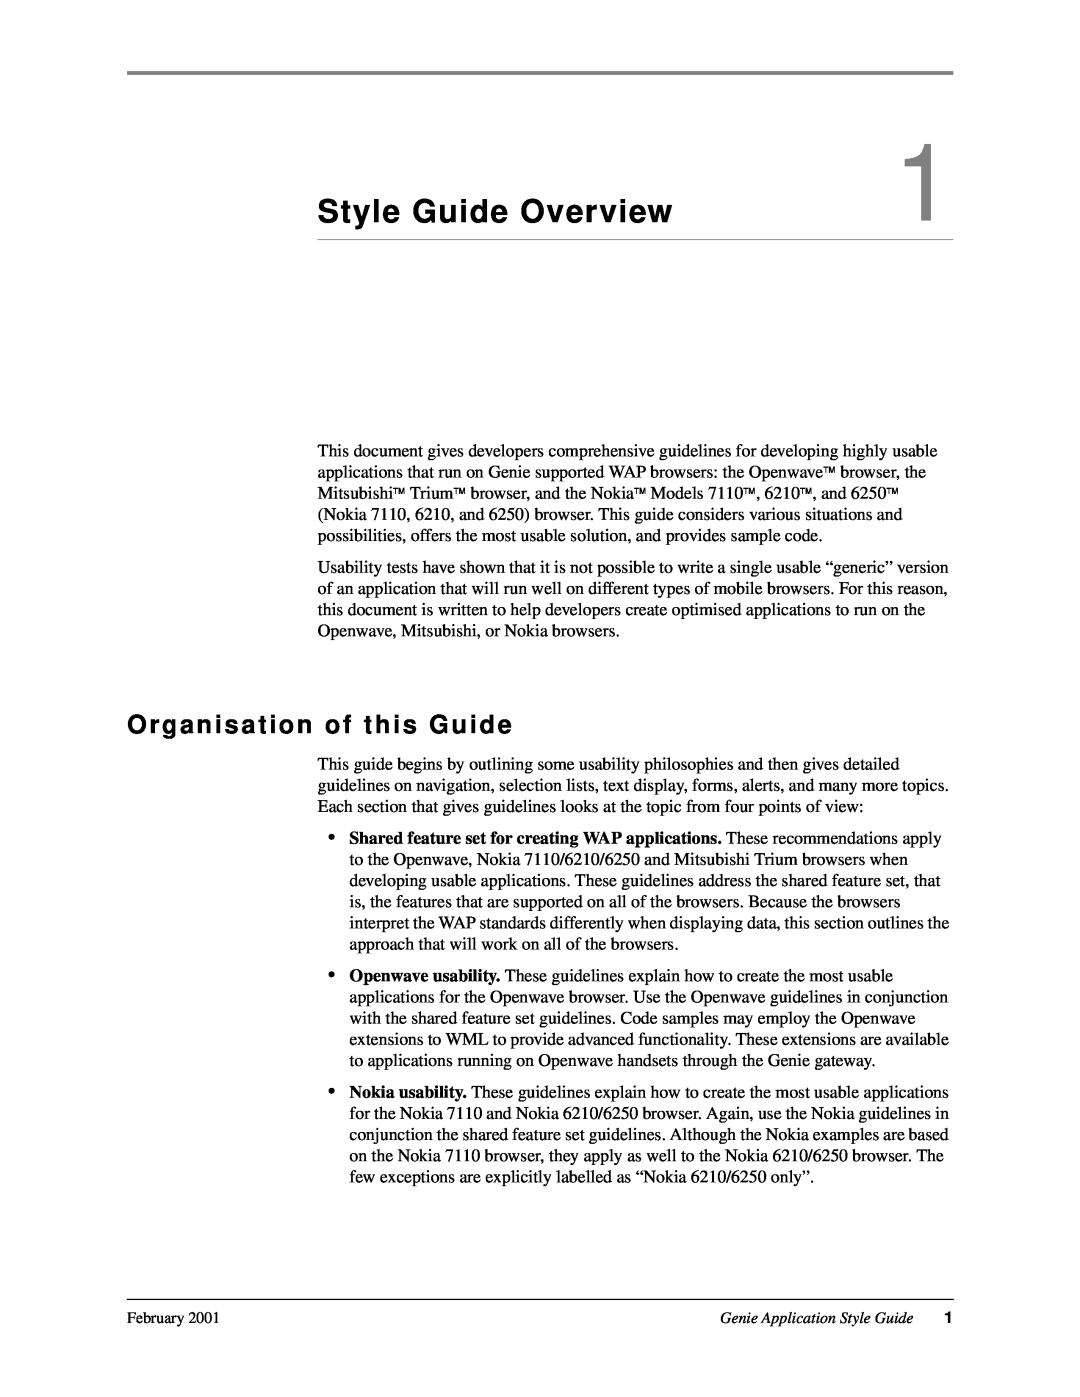 Genie 7110 manual Style Guide Overview, Organisation of this Guide 